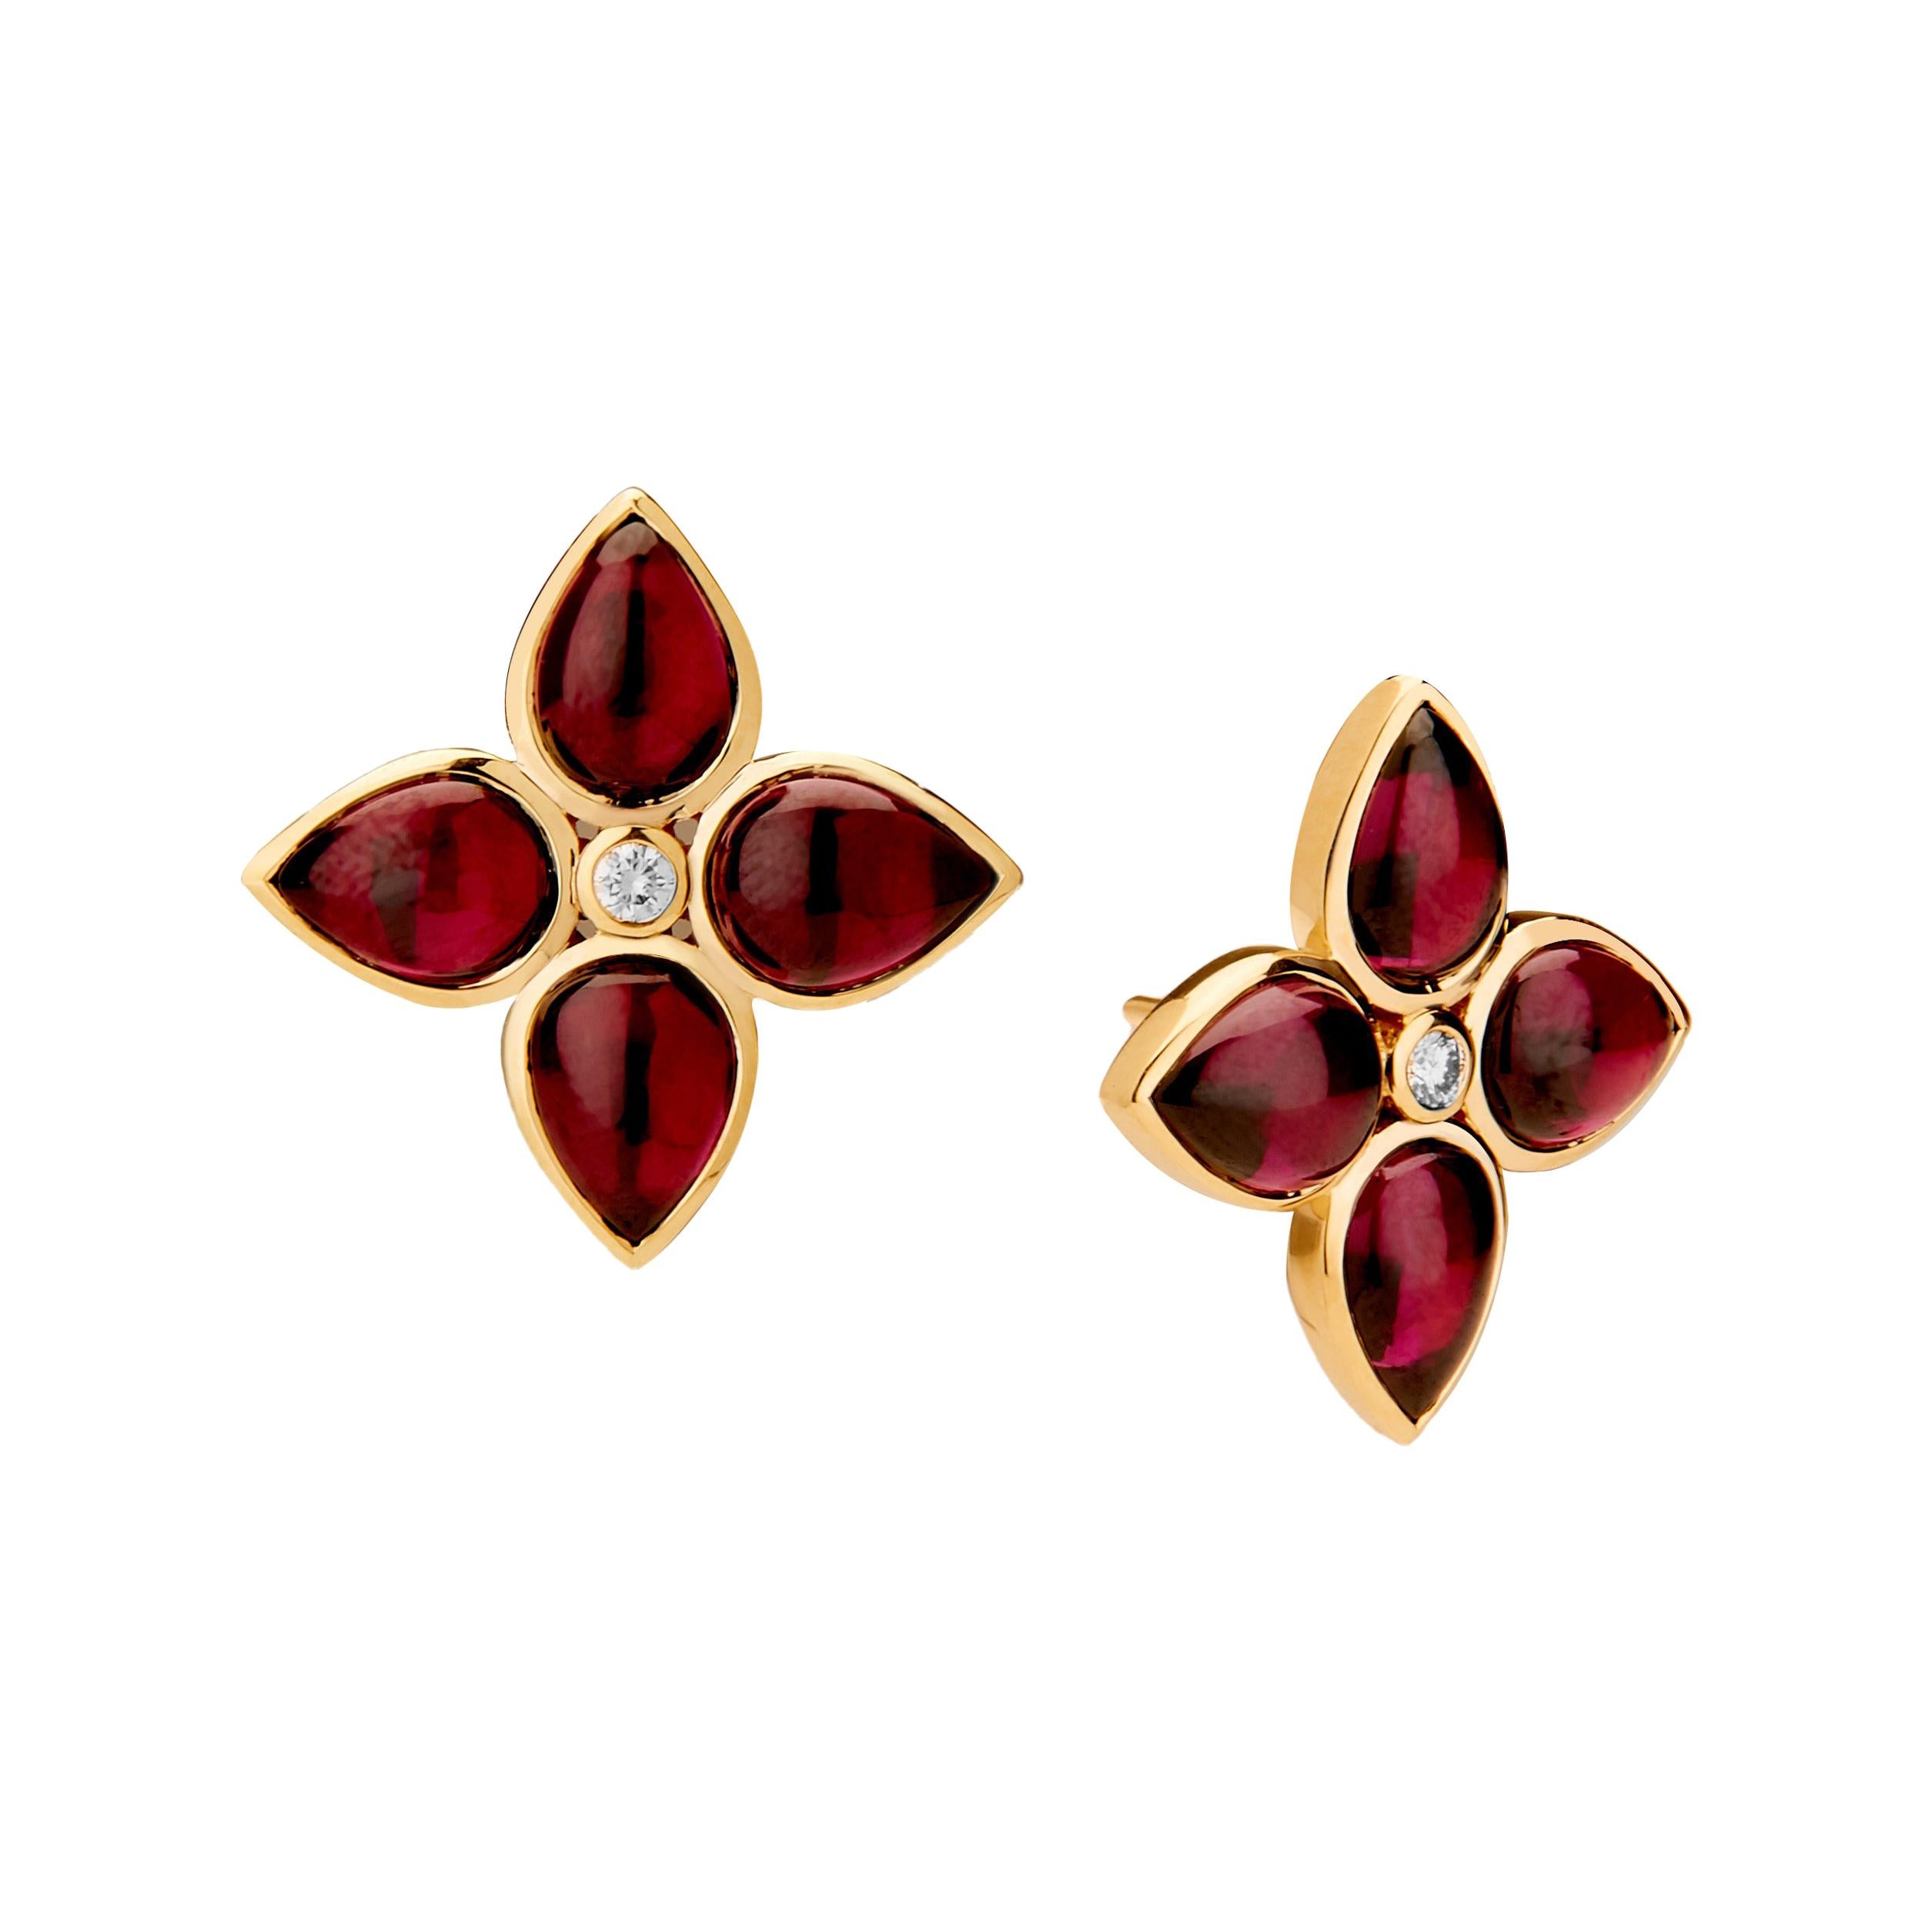 Syna Yellow Gold Garnet Earrings with Diamonds